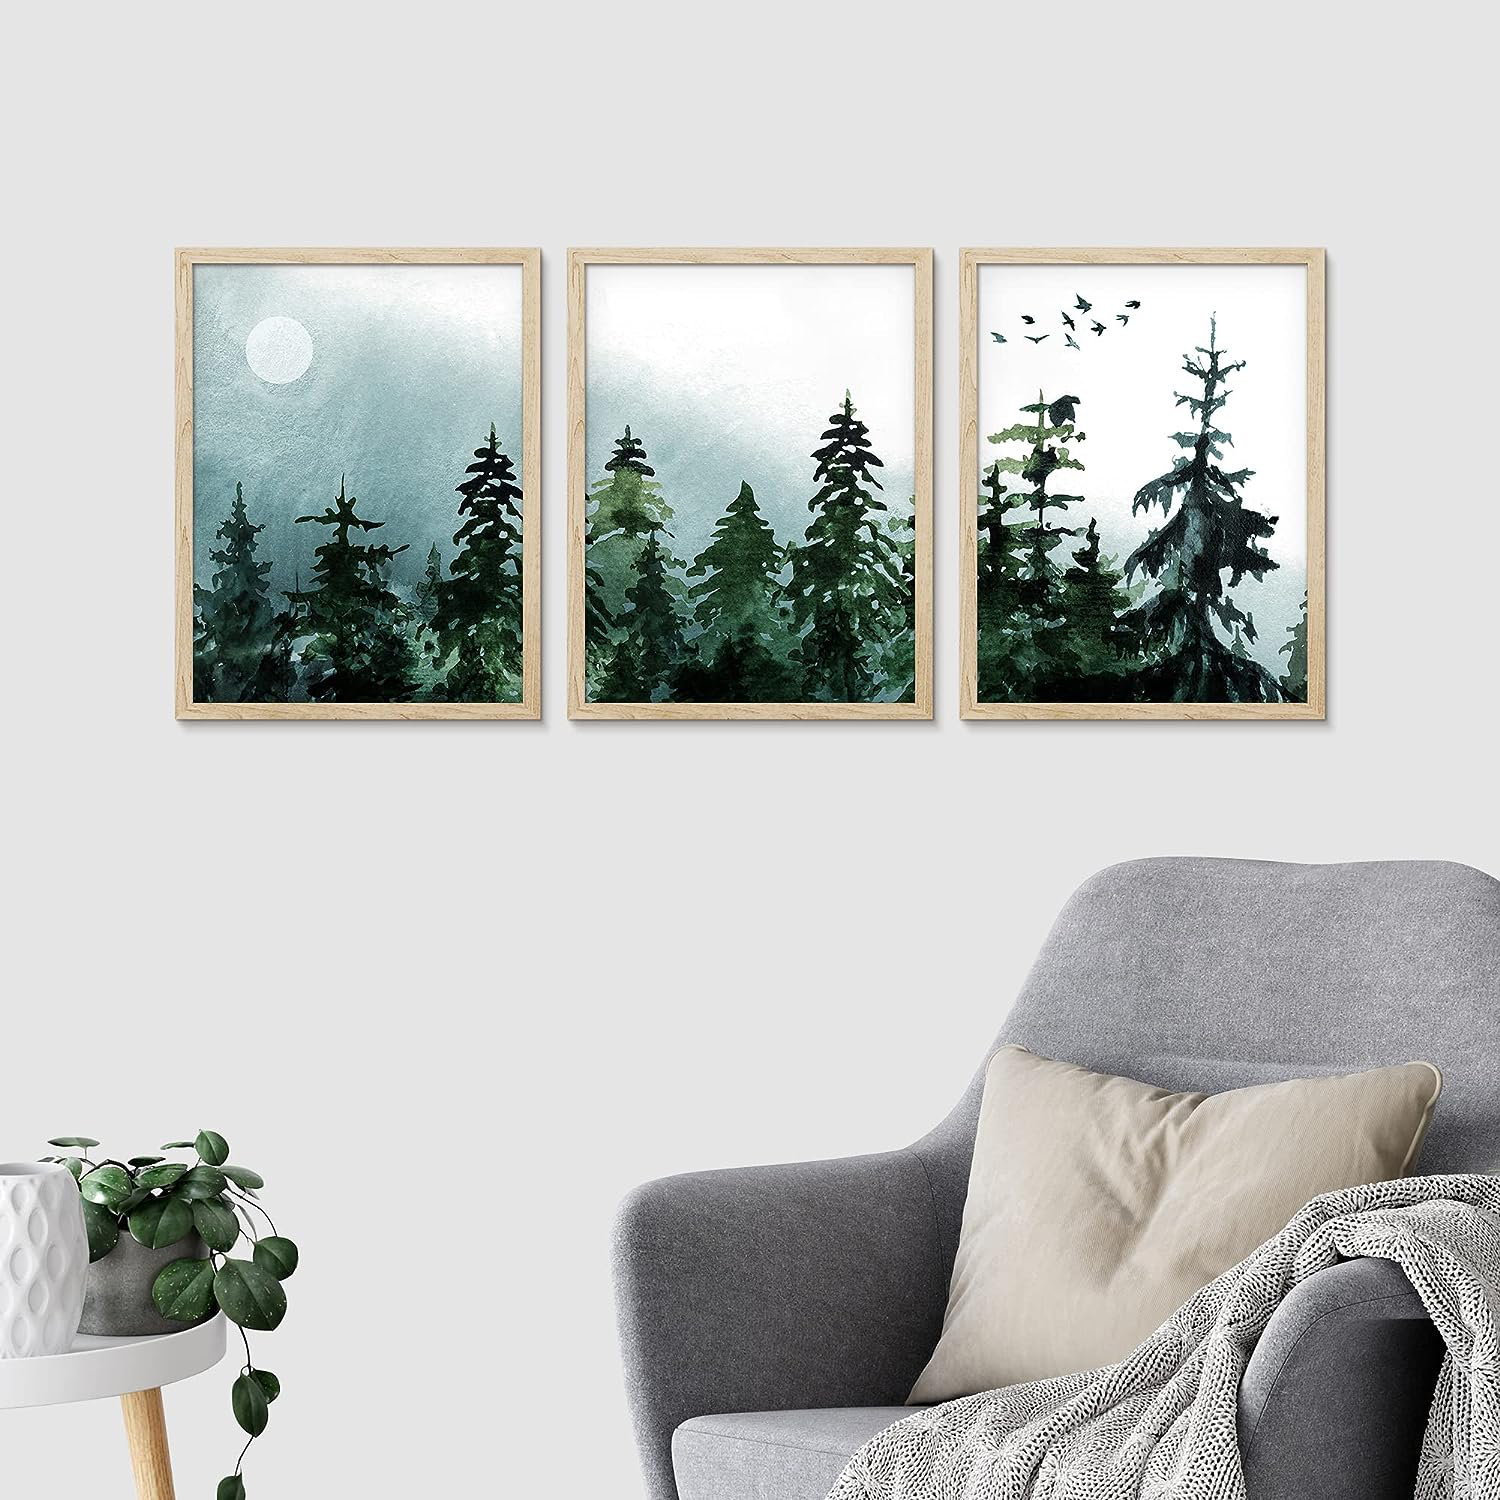 IDEA4WALL Framed Pine Trees Wall Art, Set Of 3 Watercolor Moon & Bird Wall  Decor Prints, Nature Wilderness Wall Décor For Living Room, Bedroom Framed  3 Pieces Print